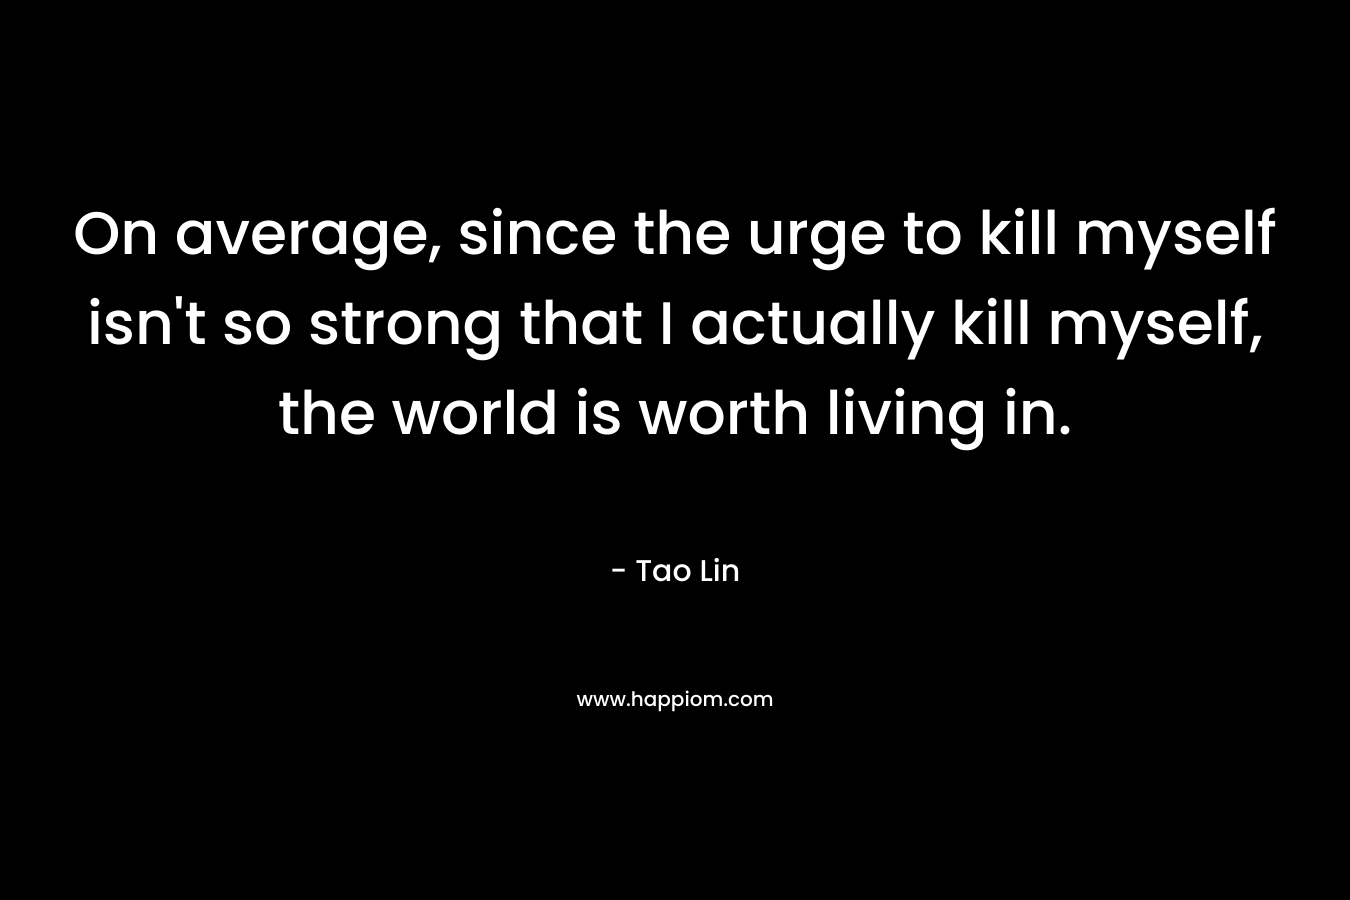 On average, since the urge to kill myself isn't so strong that I actually kill myself, the world is worth living in.